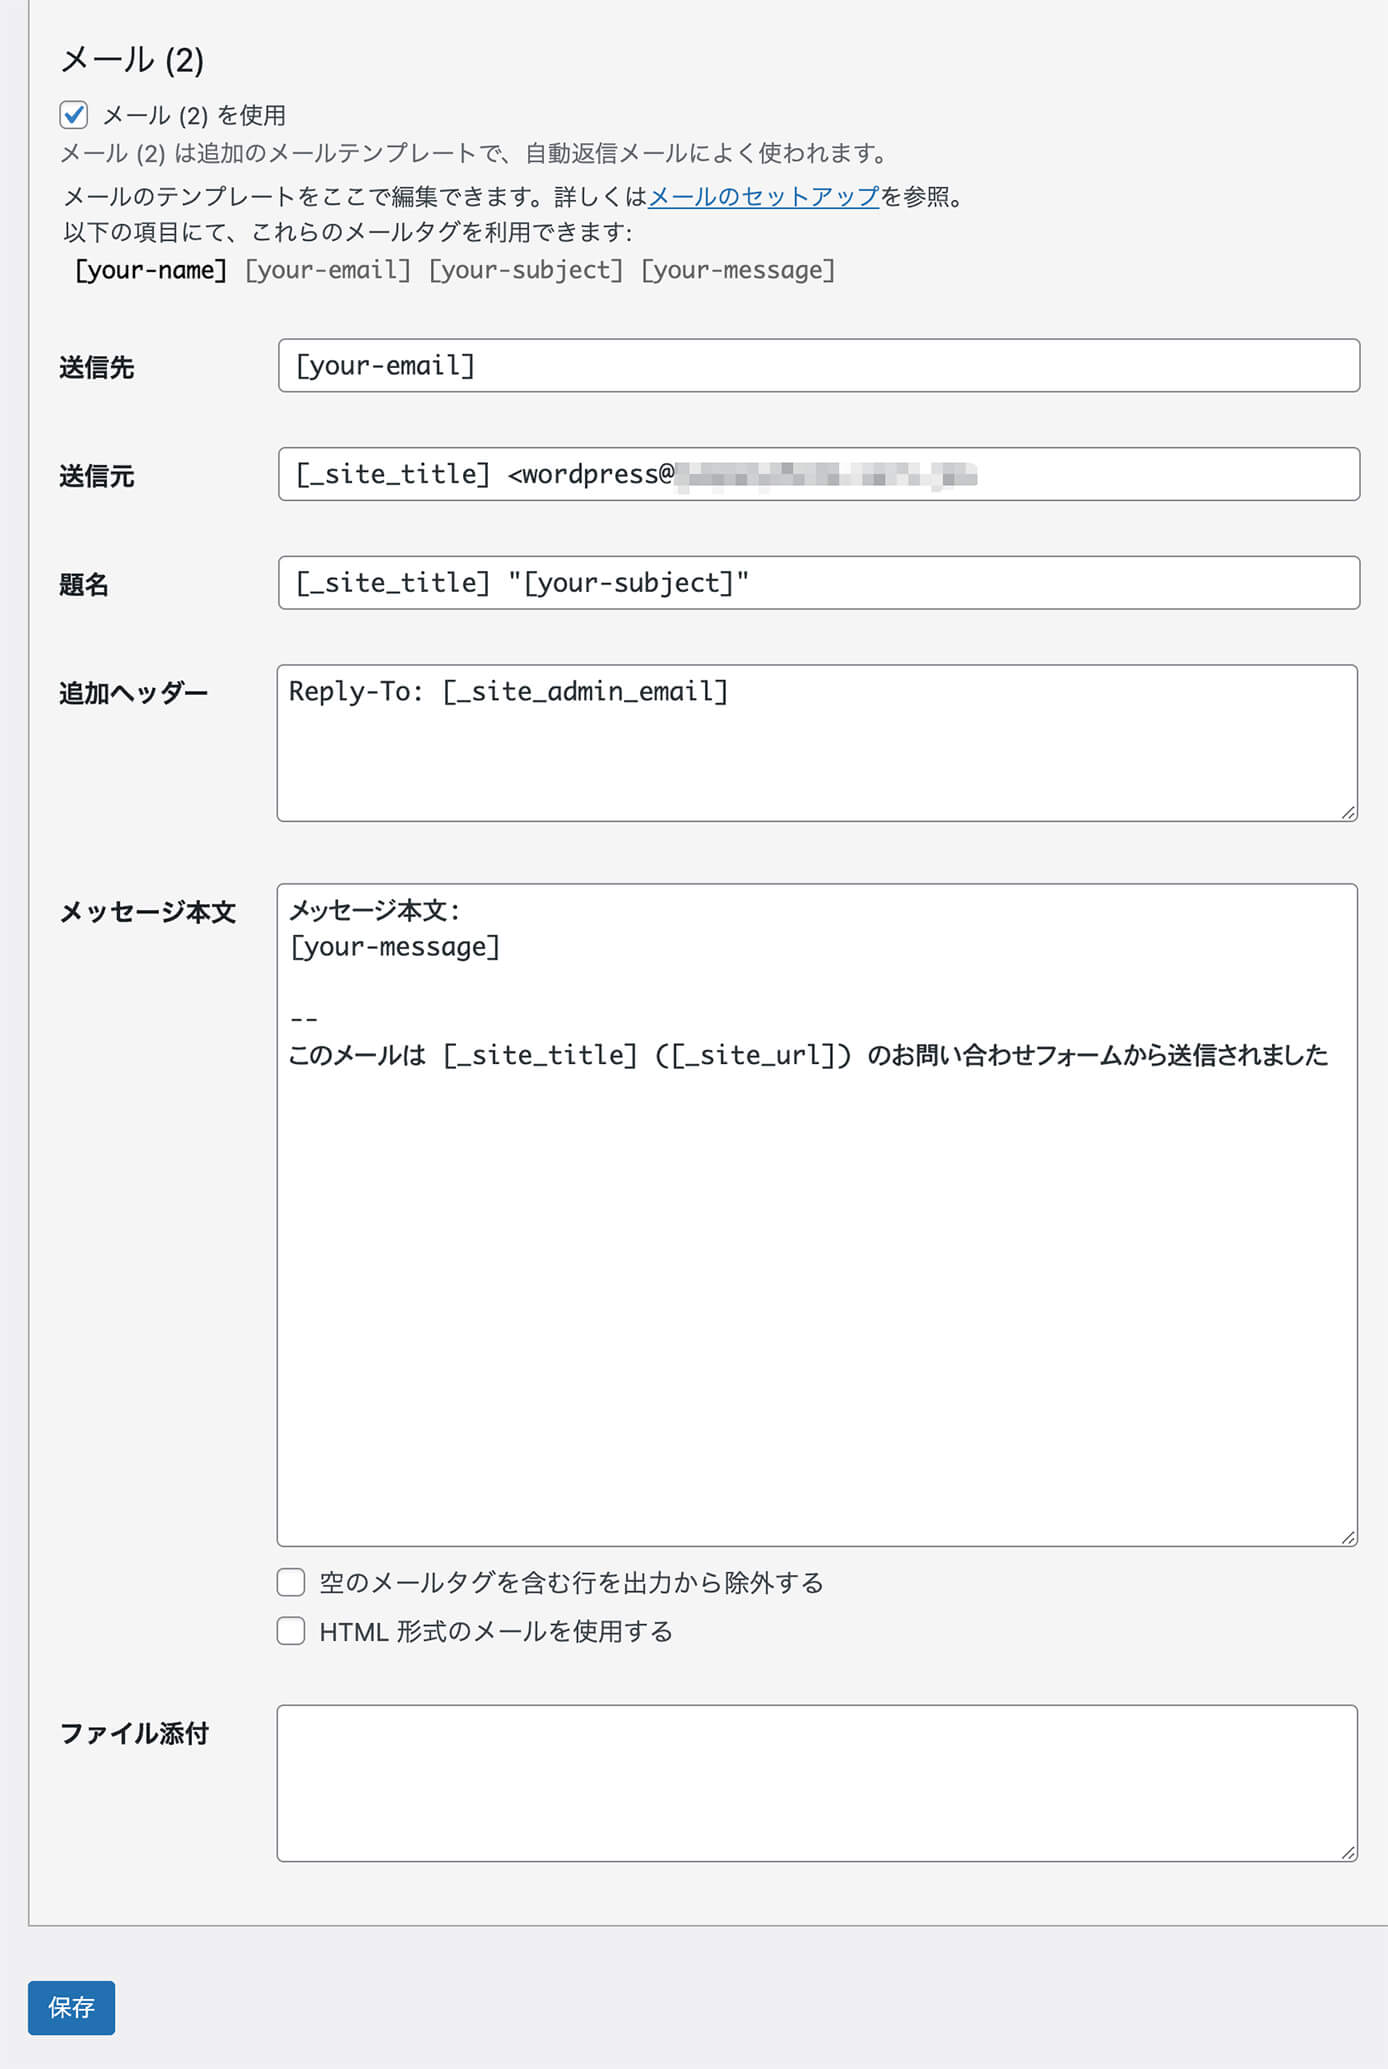 Contact From 7：自動返信設定